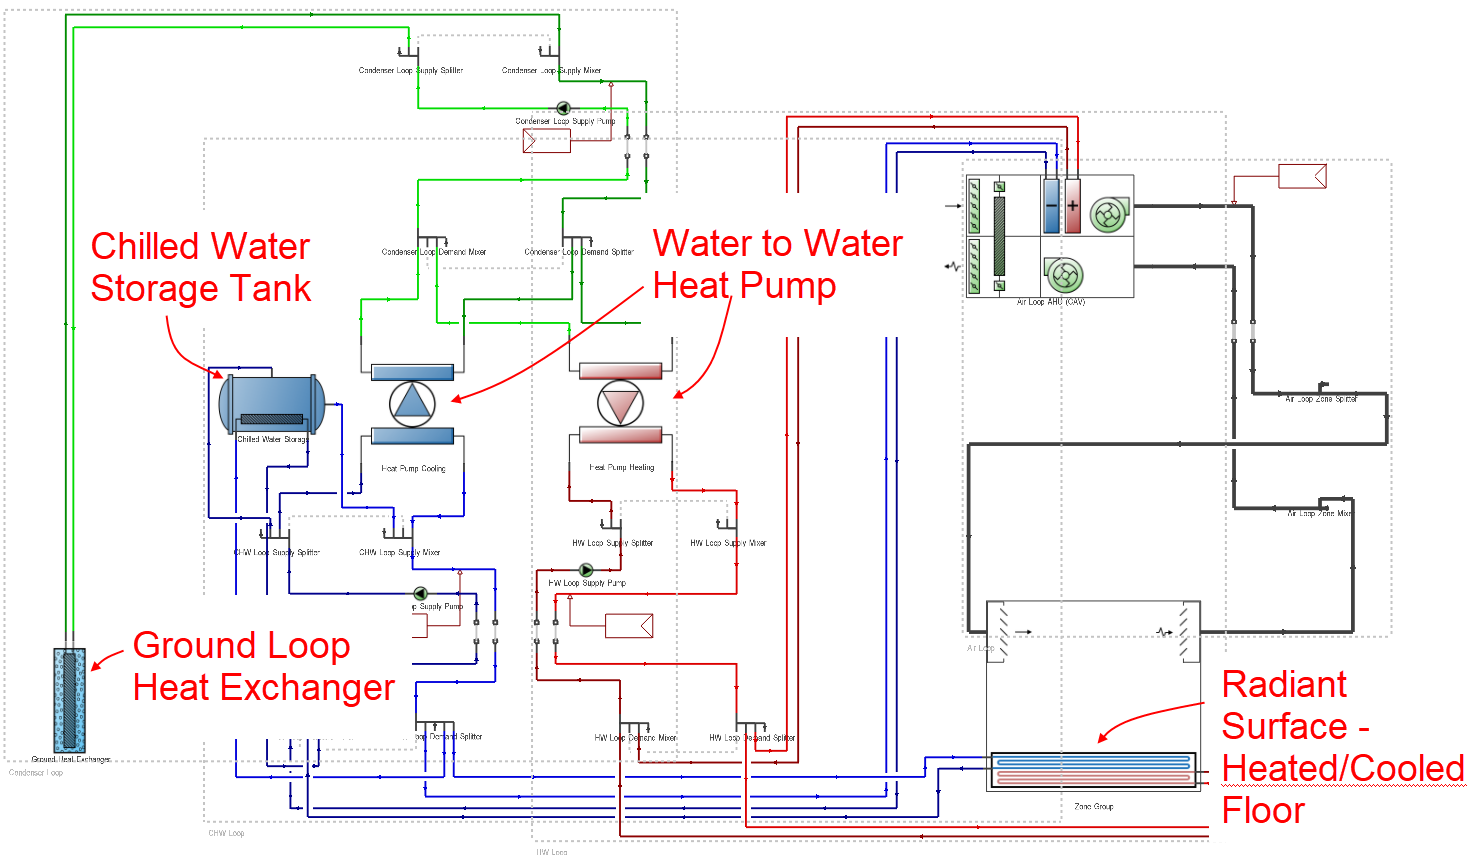 HVACLayout4.png